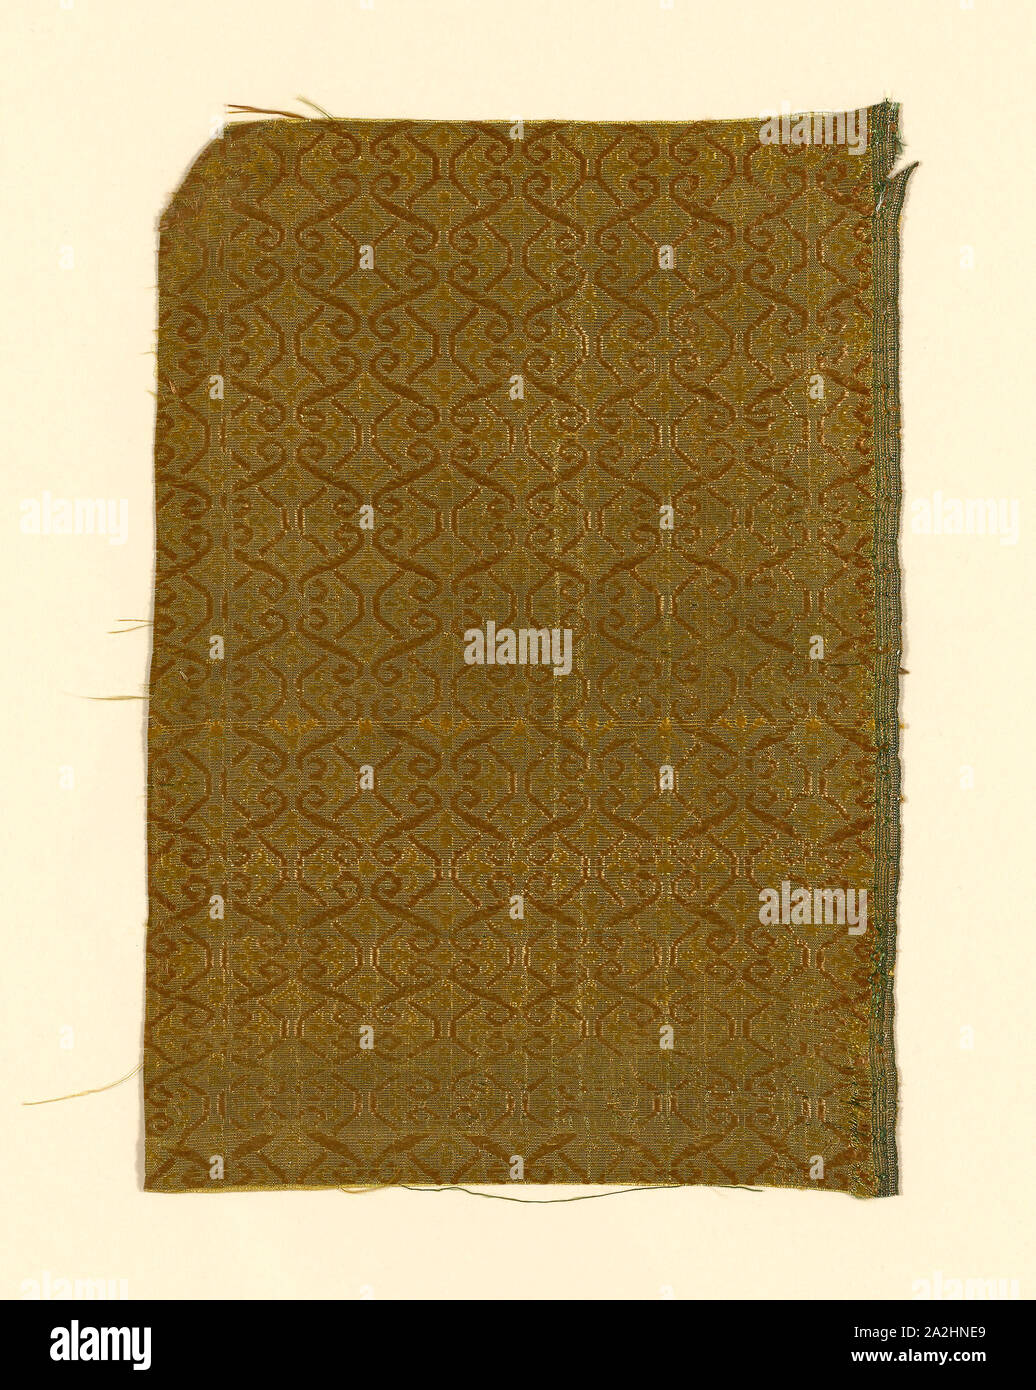 Fragment, 1625/75, Italy, Silk, warp-faced weft-ribbed plain weave self-patterned by complementary ground weft floats, 24.2 x 16.5 cm (9 1/2 x 6 1/2 in Stock Photo